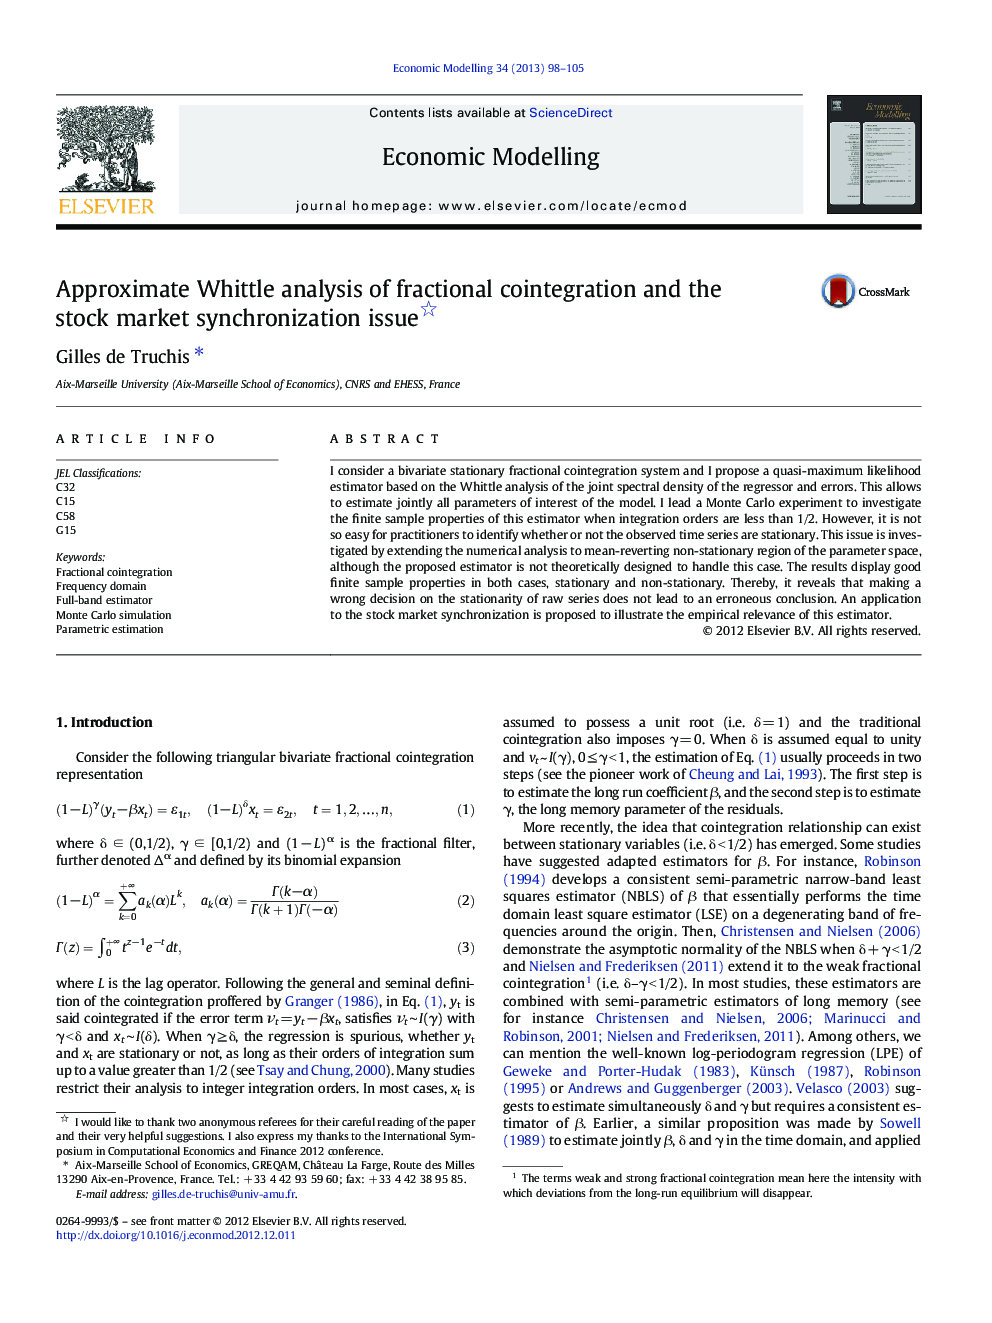 Approximate Whittle analysis of fractional cointegration and the stock market synchronization issue